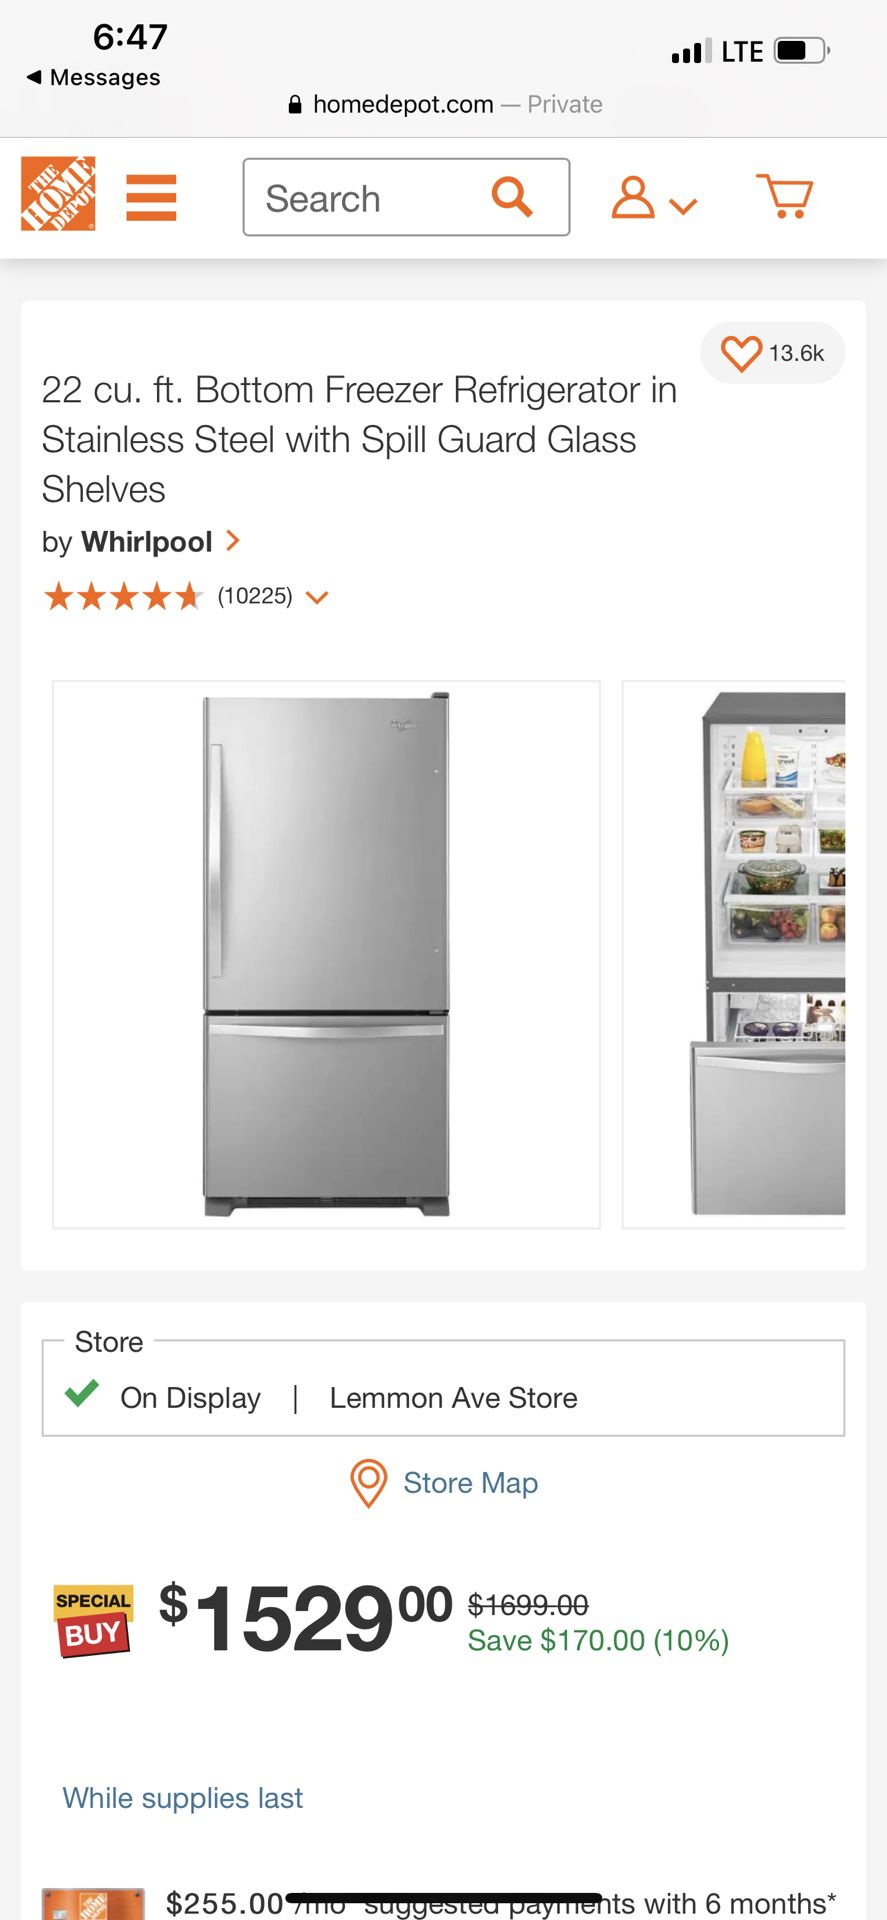 Whirlpool 22 cu. ft. Bottom Freezer Refrigerator in Stainless Steel with Spill Guard Glass Shelves-WRB322DMBM - The Home Depot